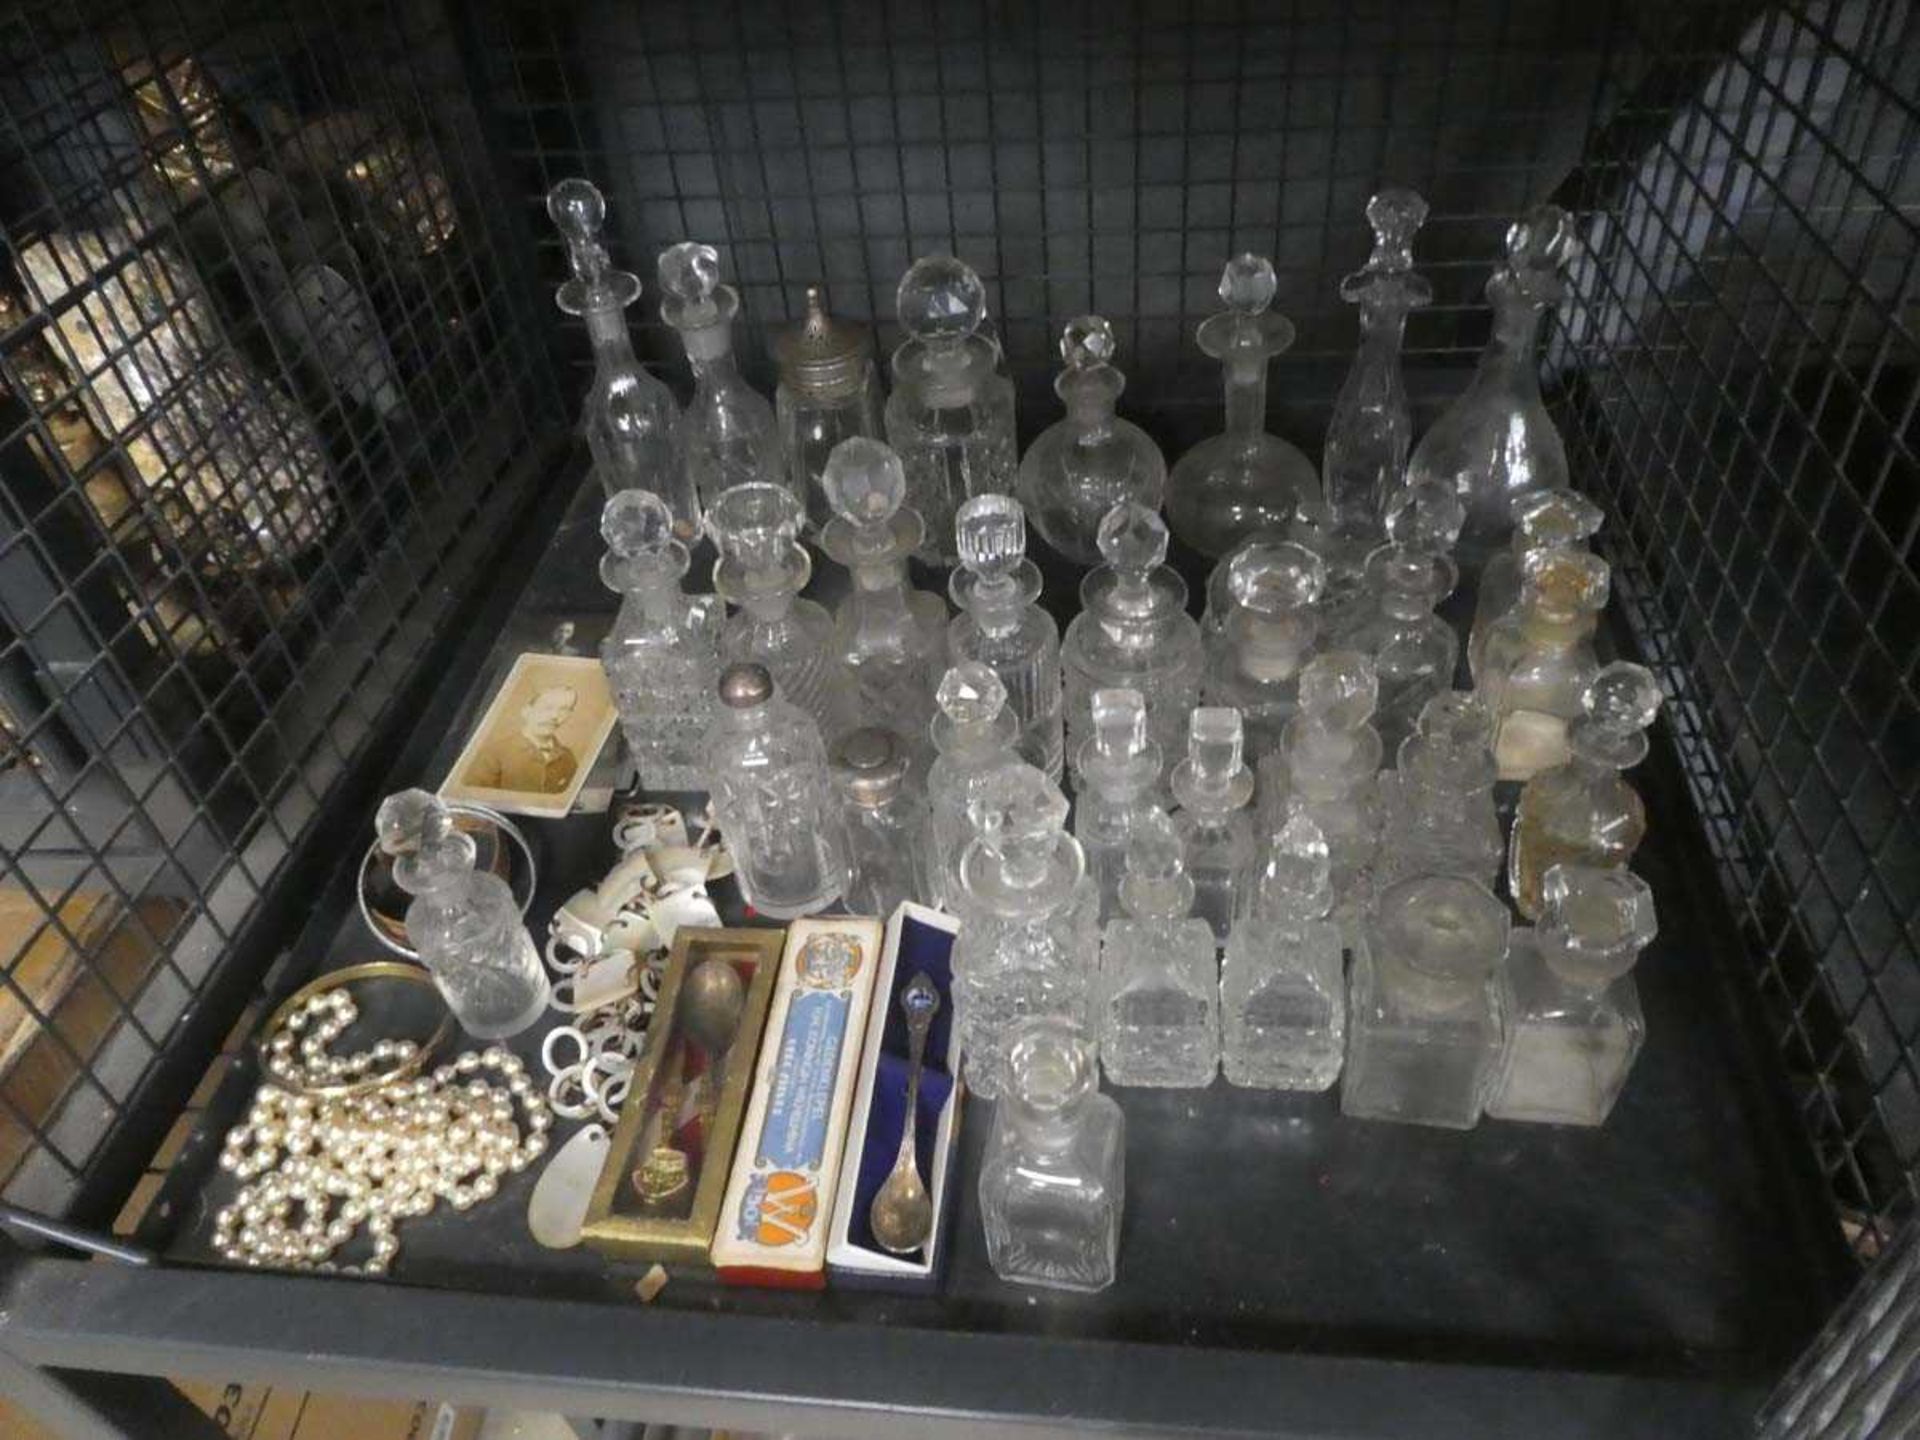 Cage containing a collection of sauce bottles plus souvenir spoons and Edwardian photo portraits